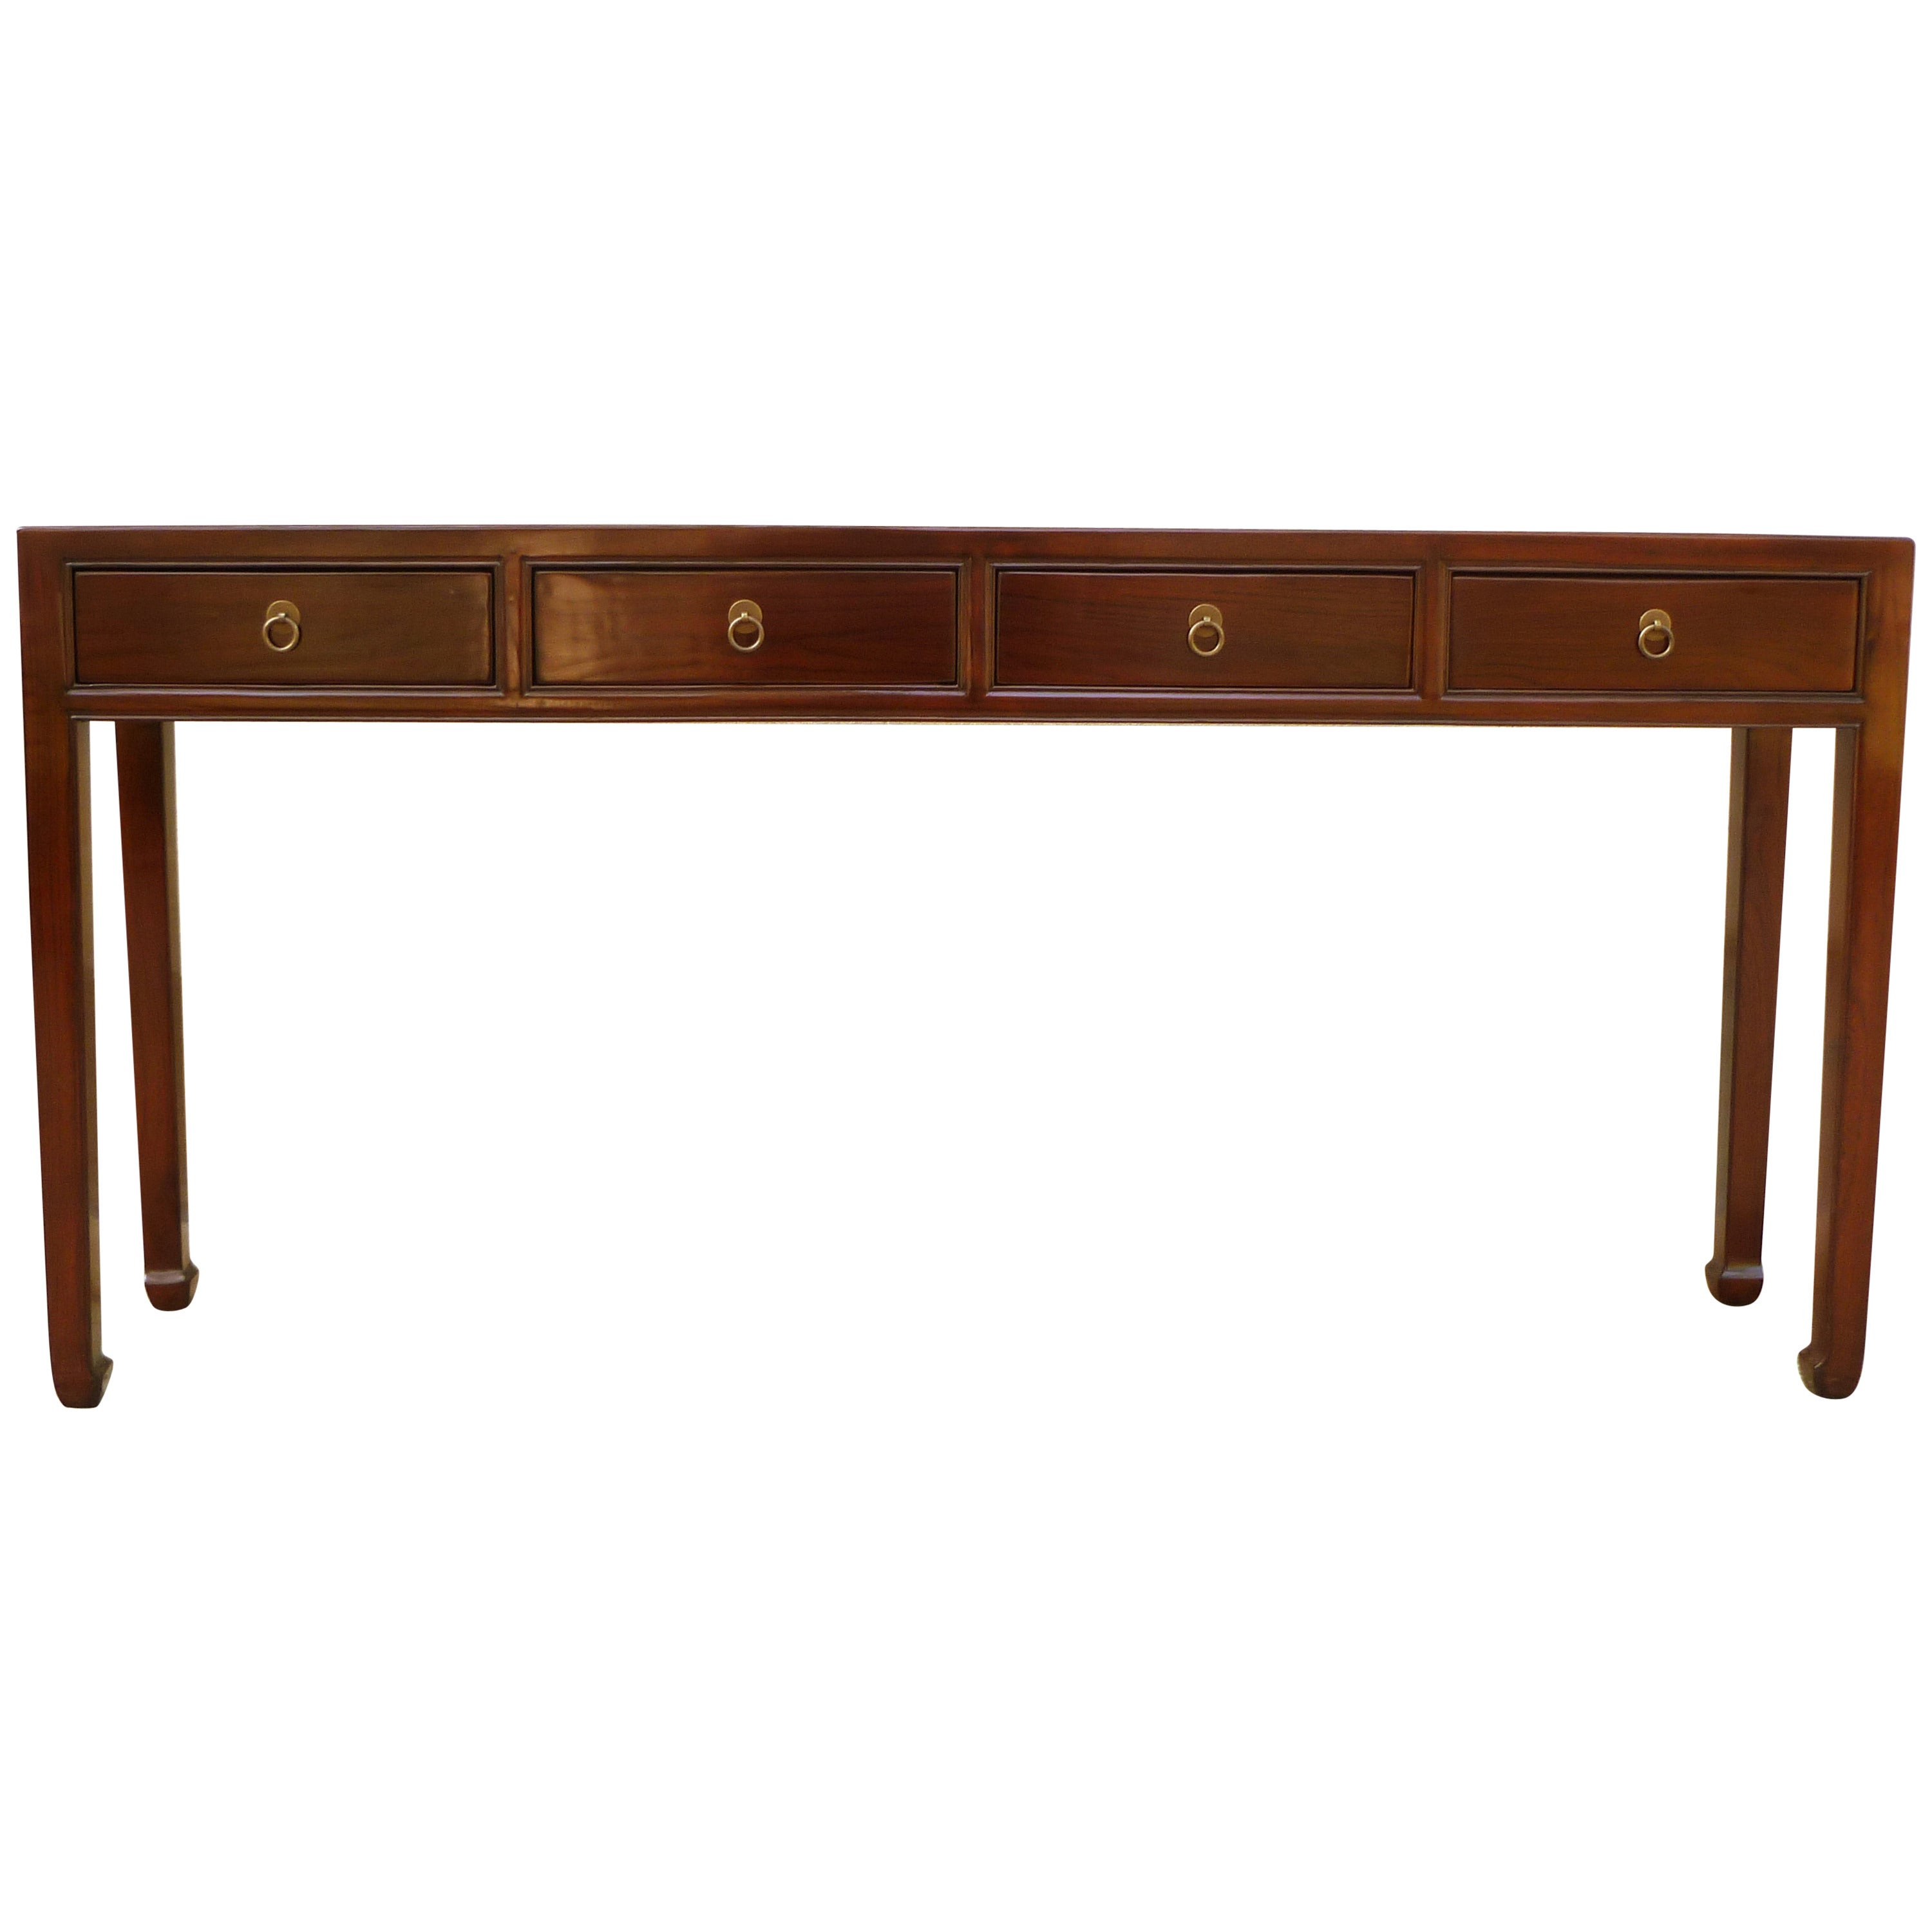 Fine Ju Mu Wood Console Table with Four Drawers